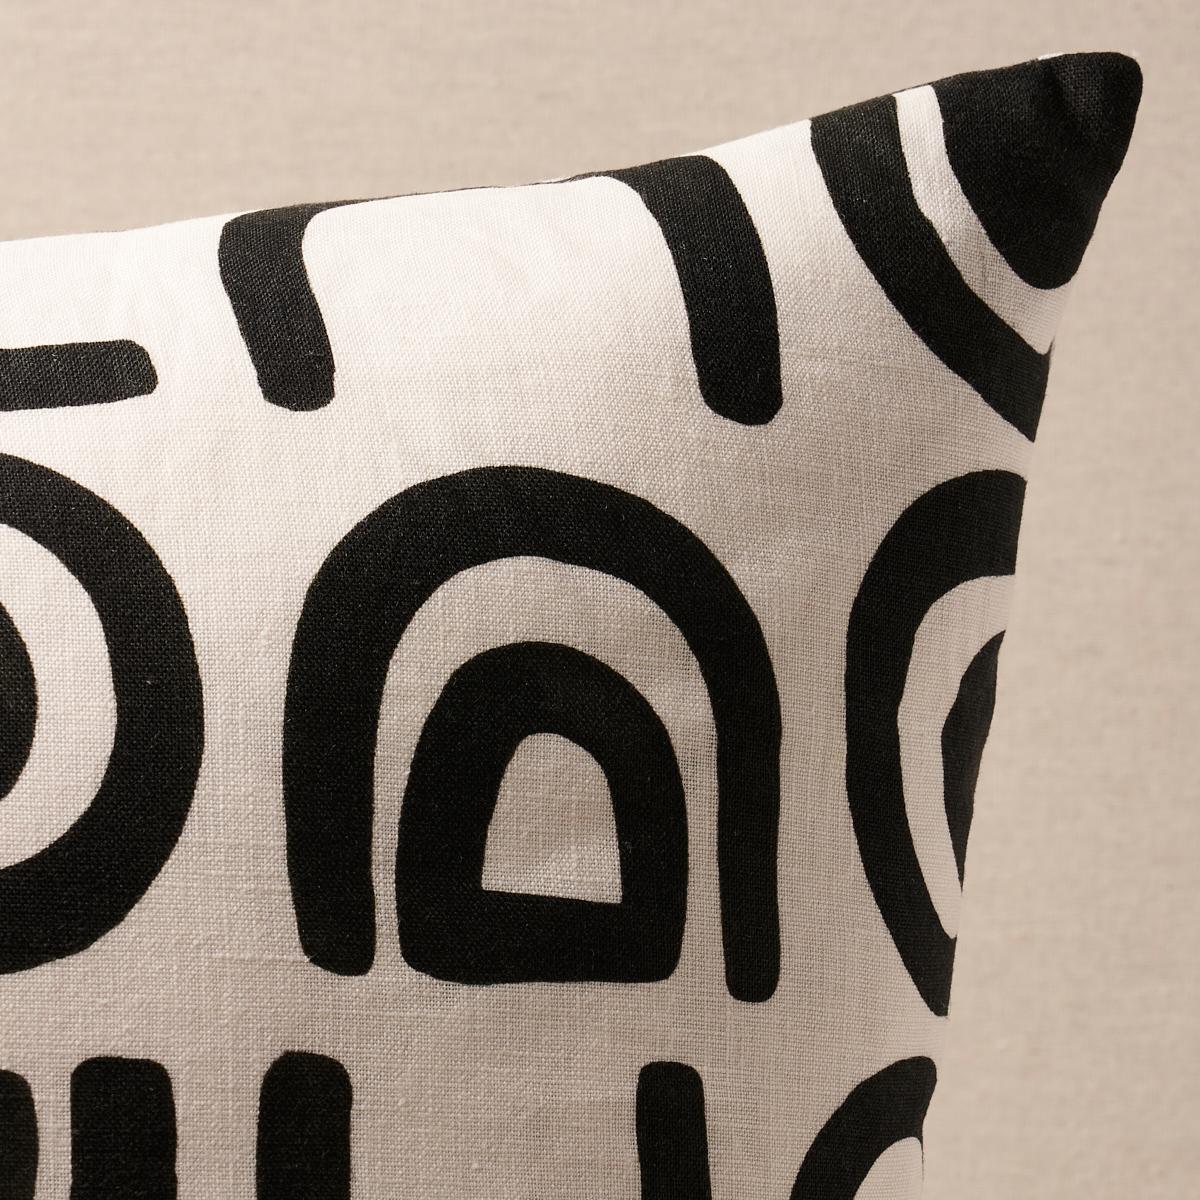 This pillow features Threshold Printed Linen by Hadiya Williams for Schumacher with a knife edge finish. Based on original hand-painted artwork, Hadiya Williams’ Threshold Printed Linen in carbon incorporates simple abstract elements into a lively